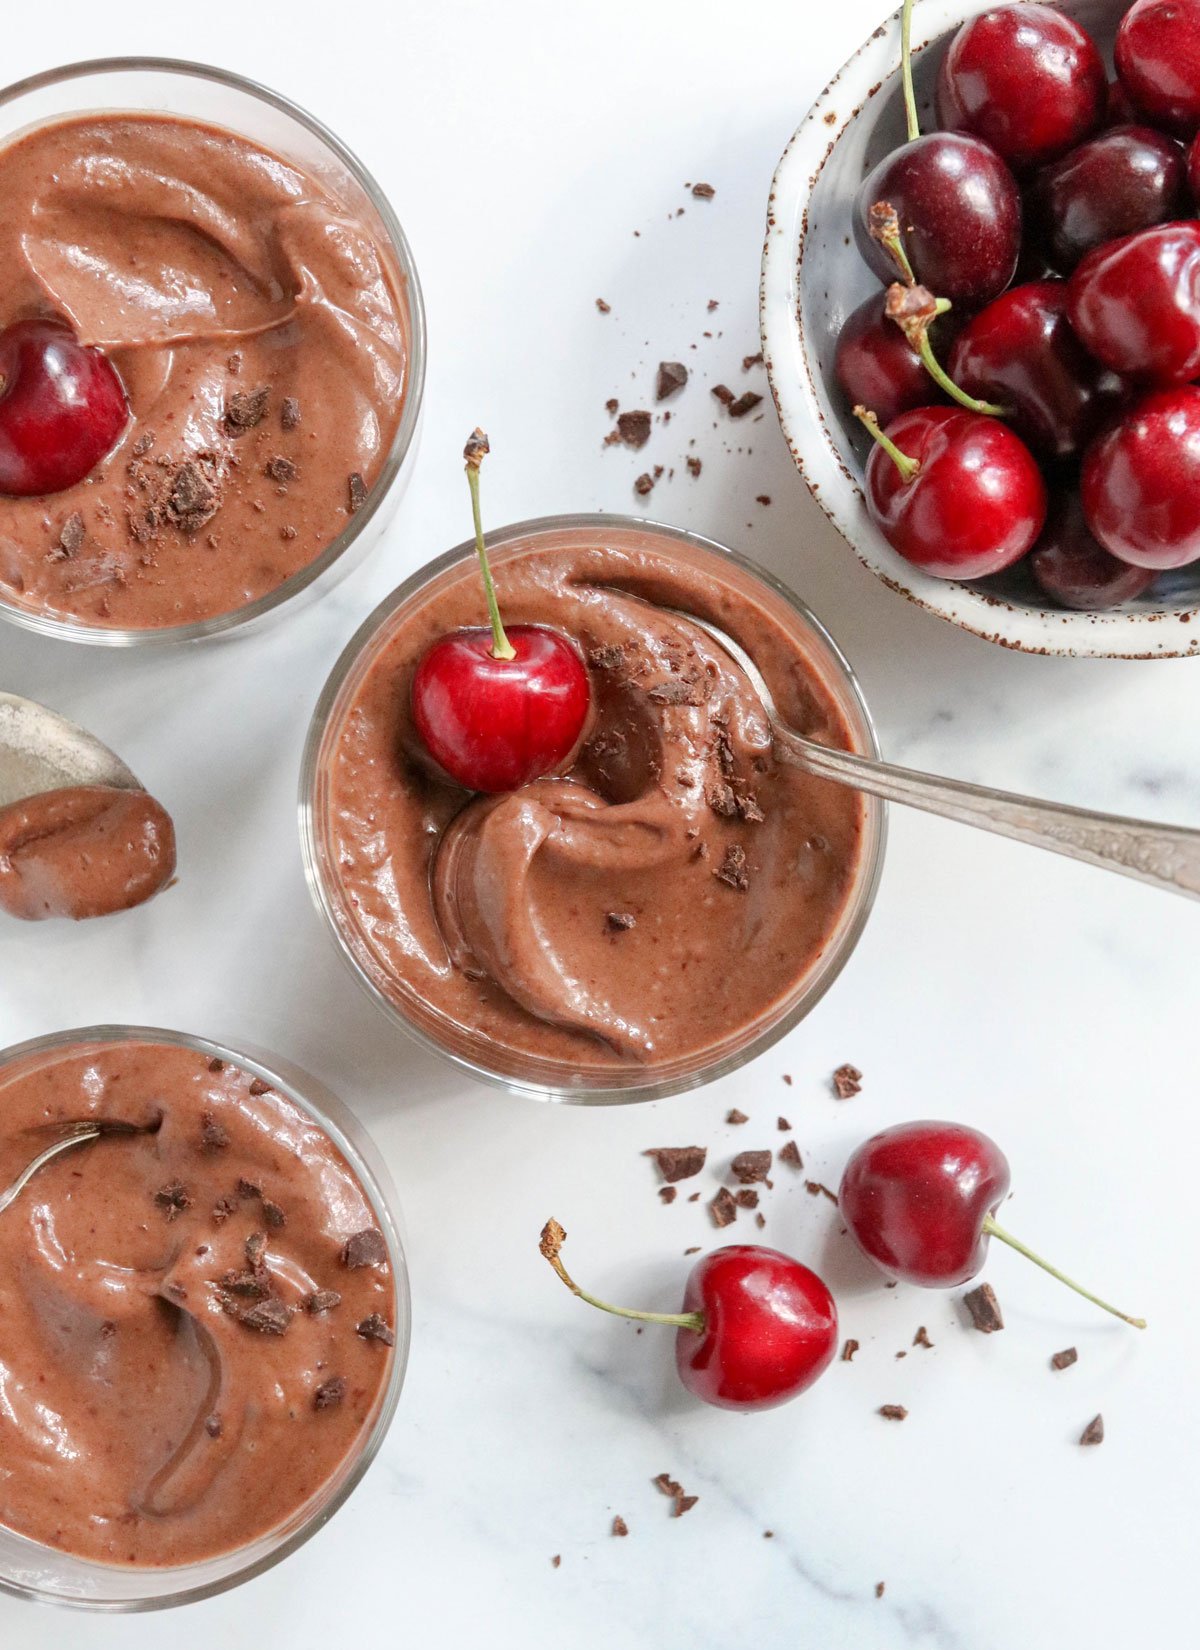 3 cups of chocolate pudding with cherries on top